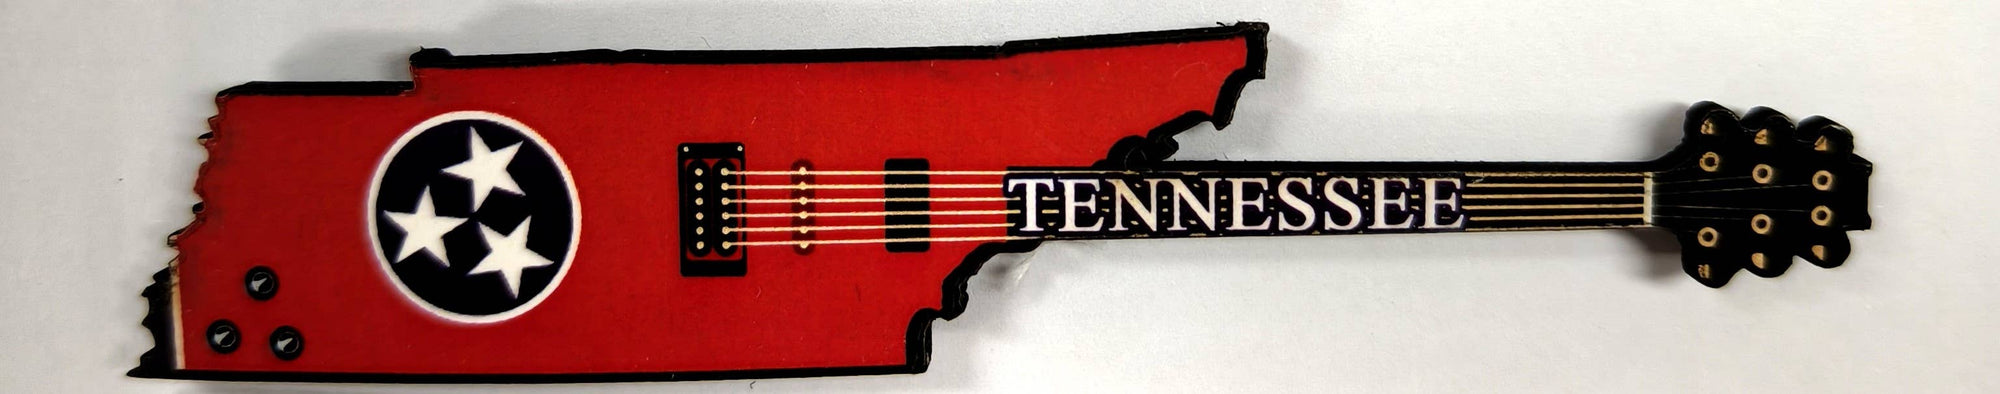 Tennessee Magnet-State Flag Guitar